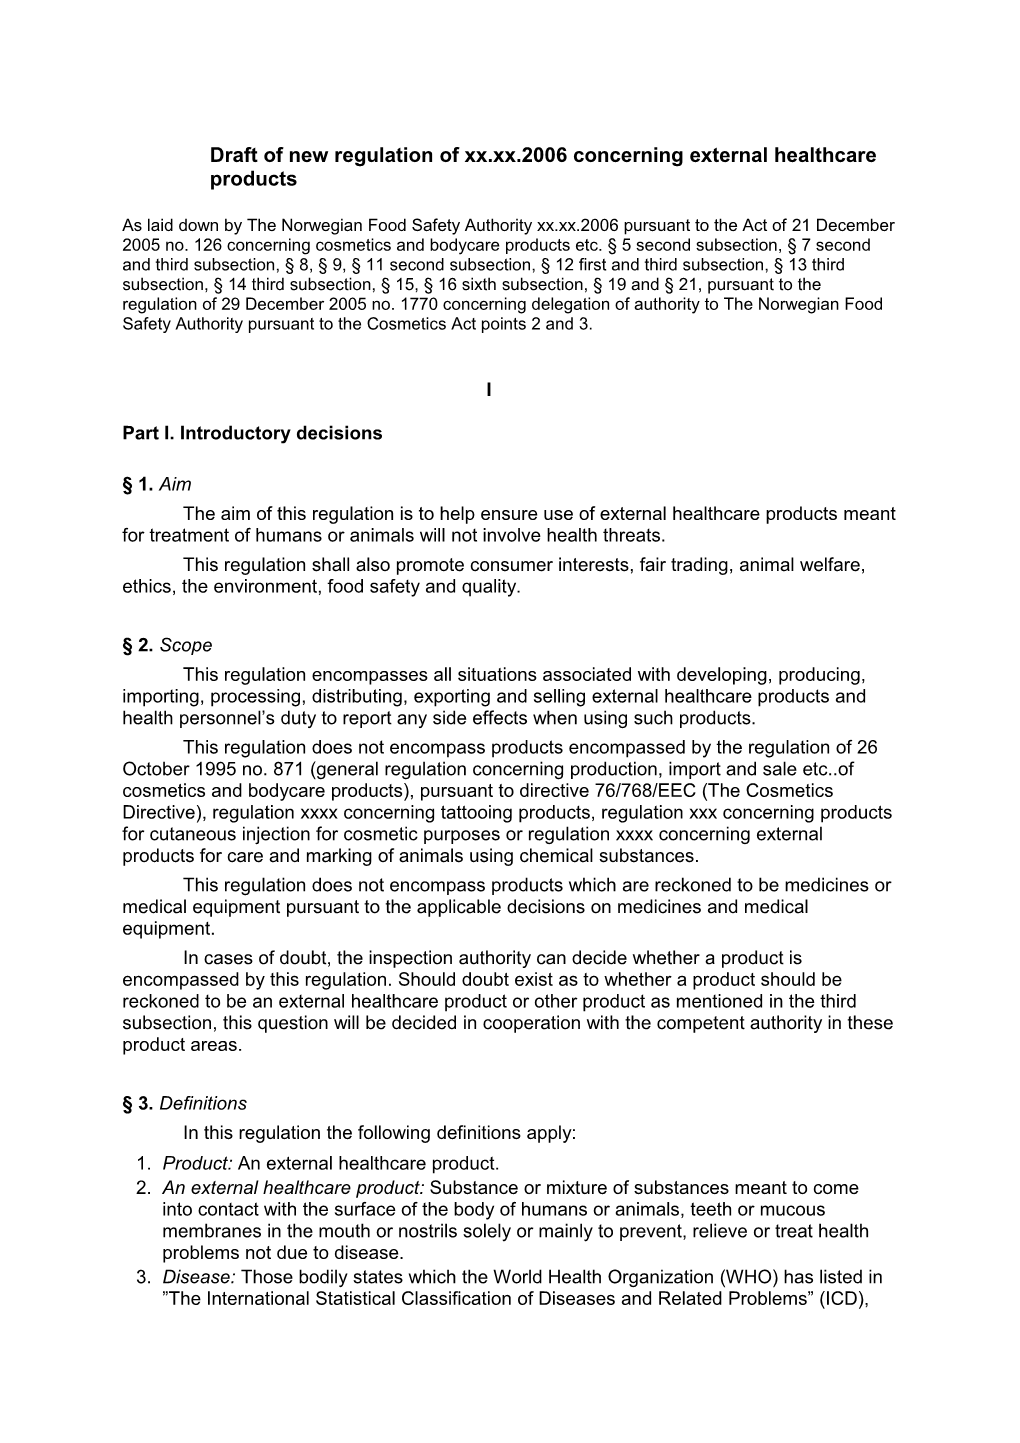 Draft of New Regulation of Xx.Xx.2006 Concerning External Healthcare Products